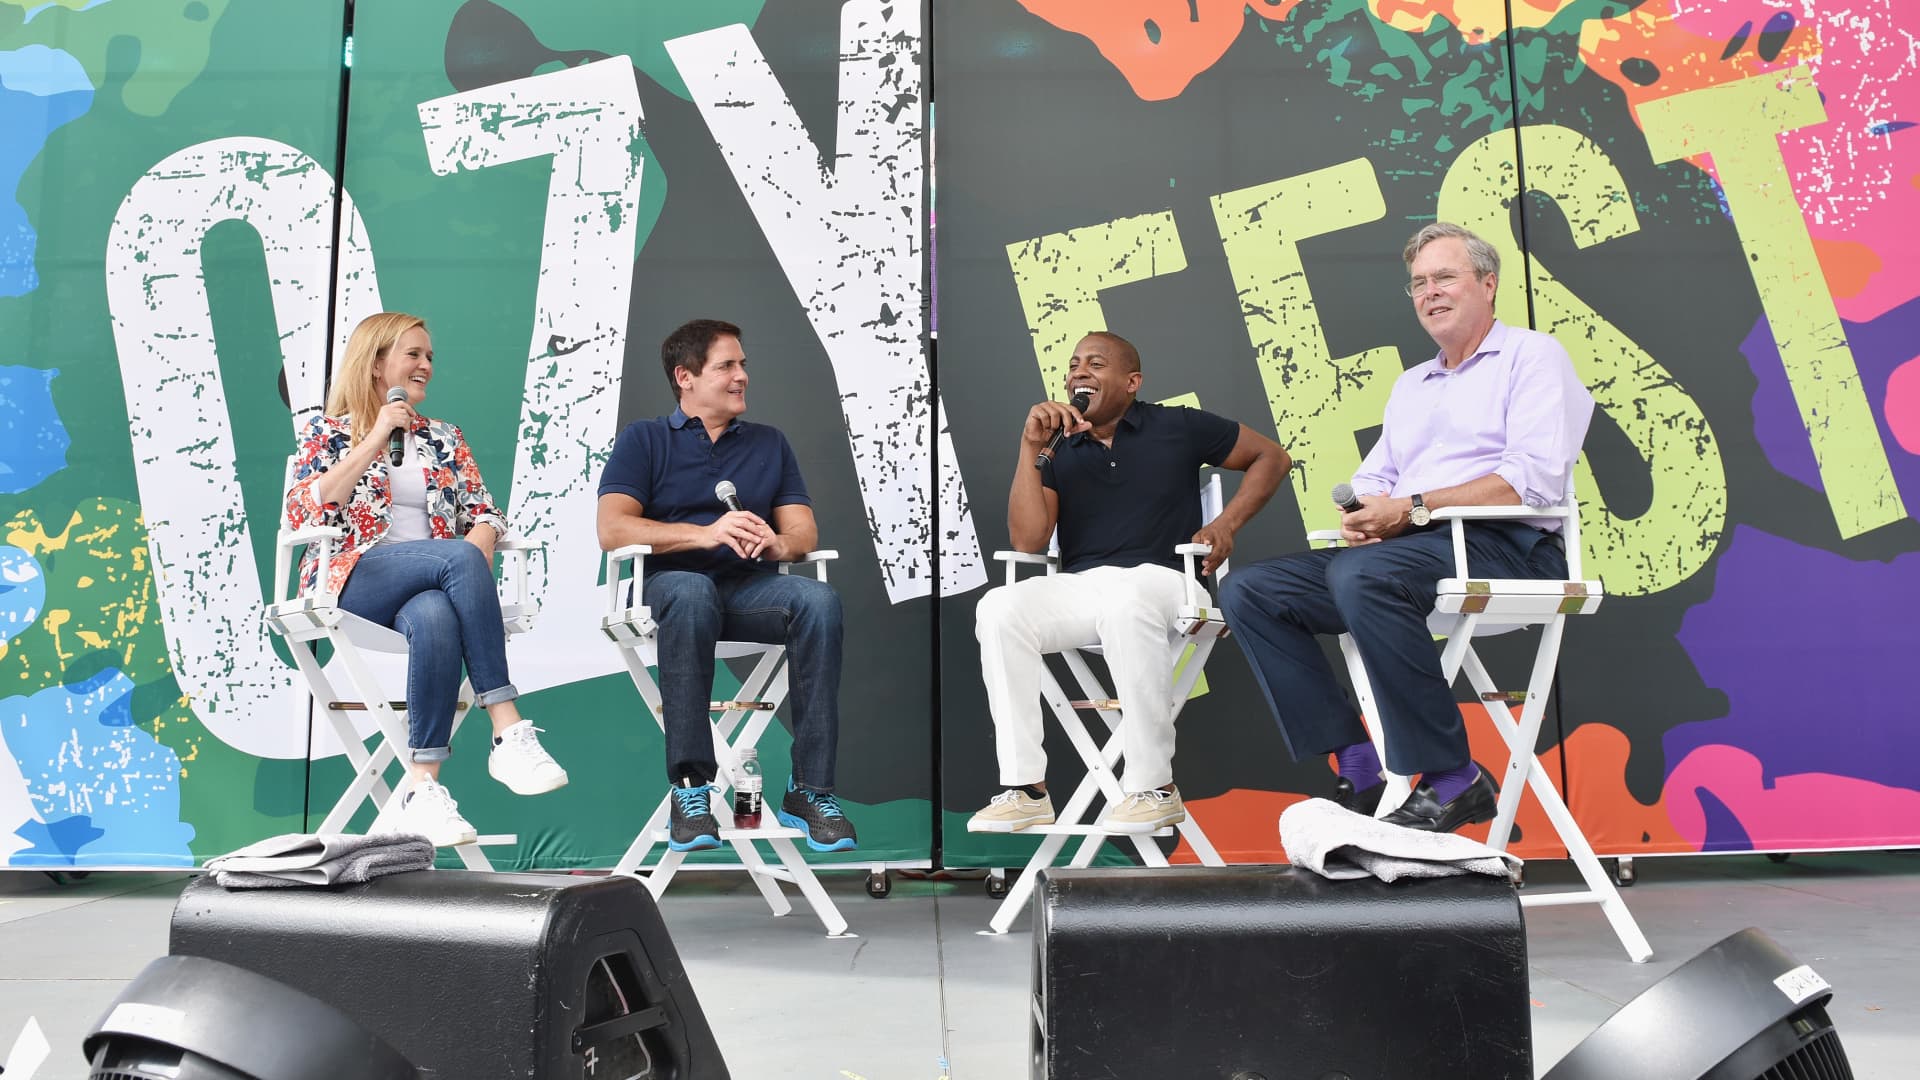 (L-R) Samantha Bee, Mark Cuban, CEO and Co-Founder Carlos Watson, and Jeb Bush speak onstage during OZY FEST 2017 Presented By OZY.com at Rumsey Playfield on July 22, 2017 in New York City.